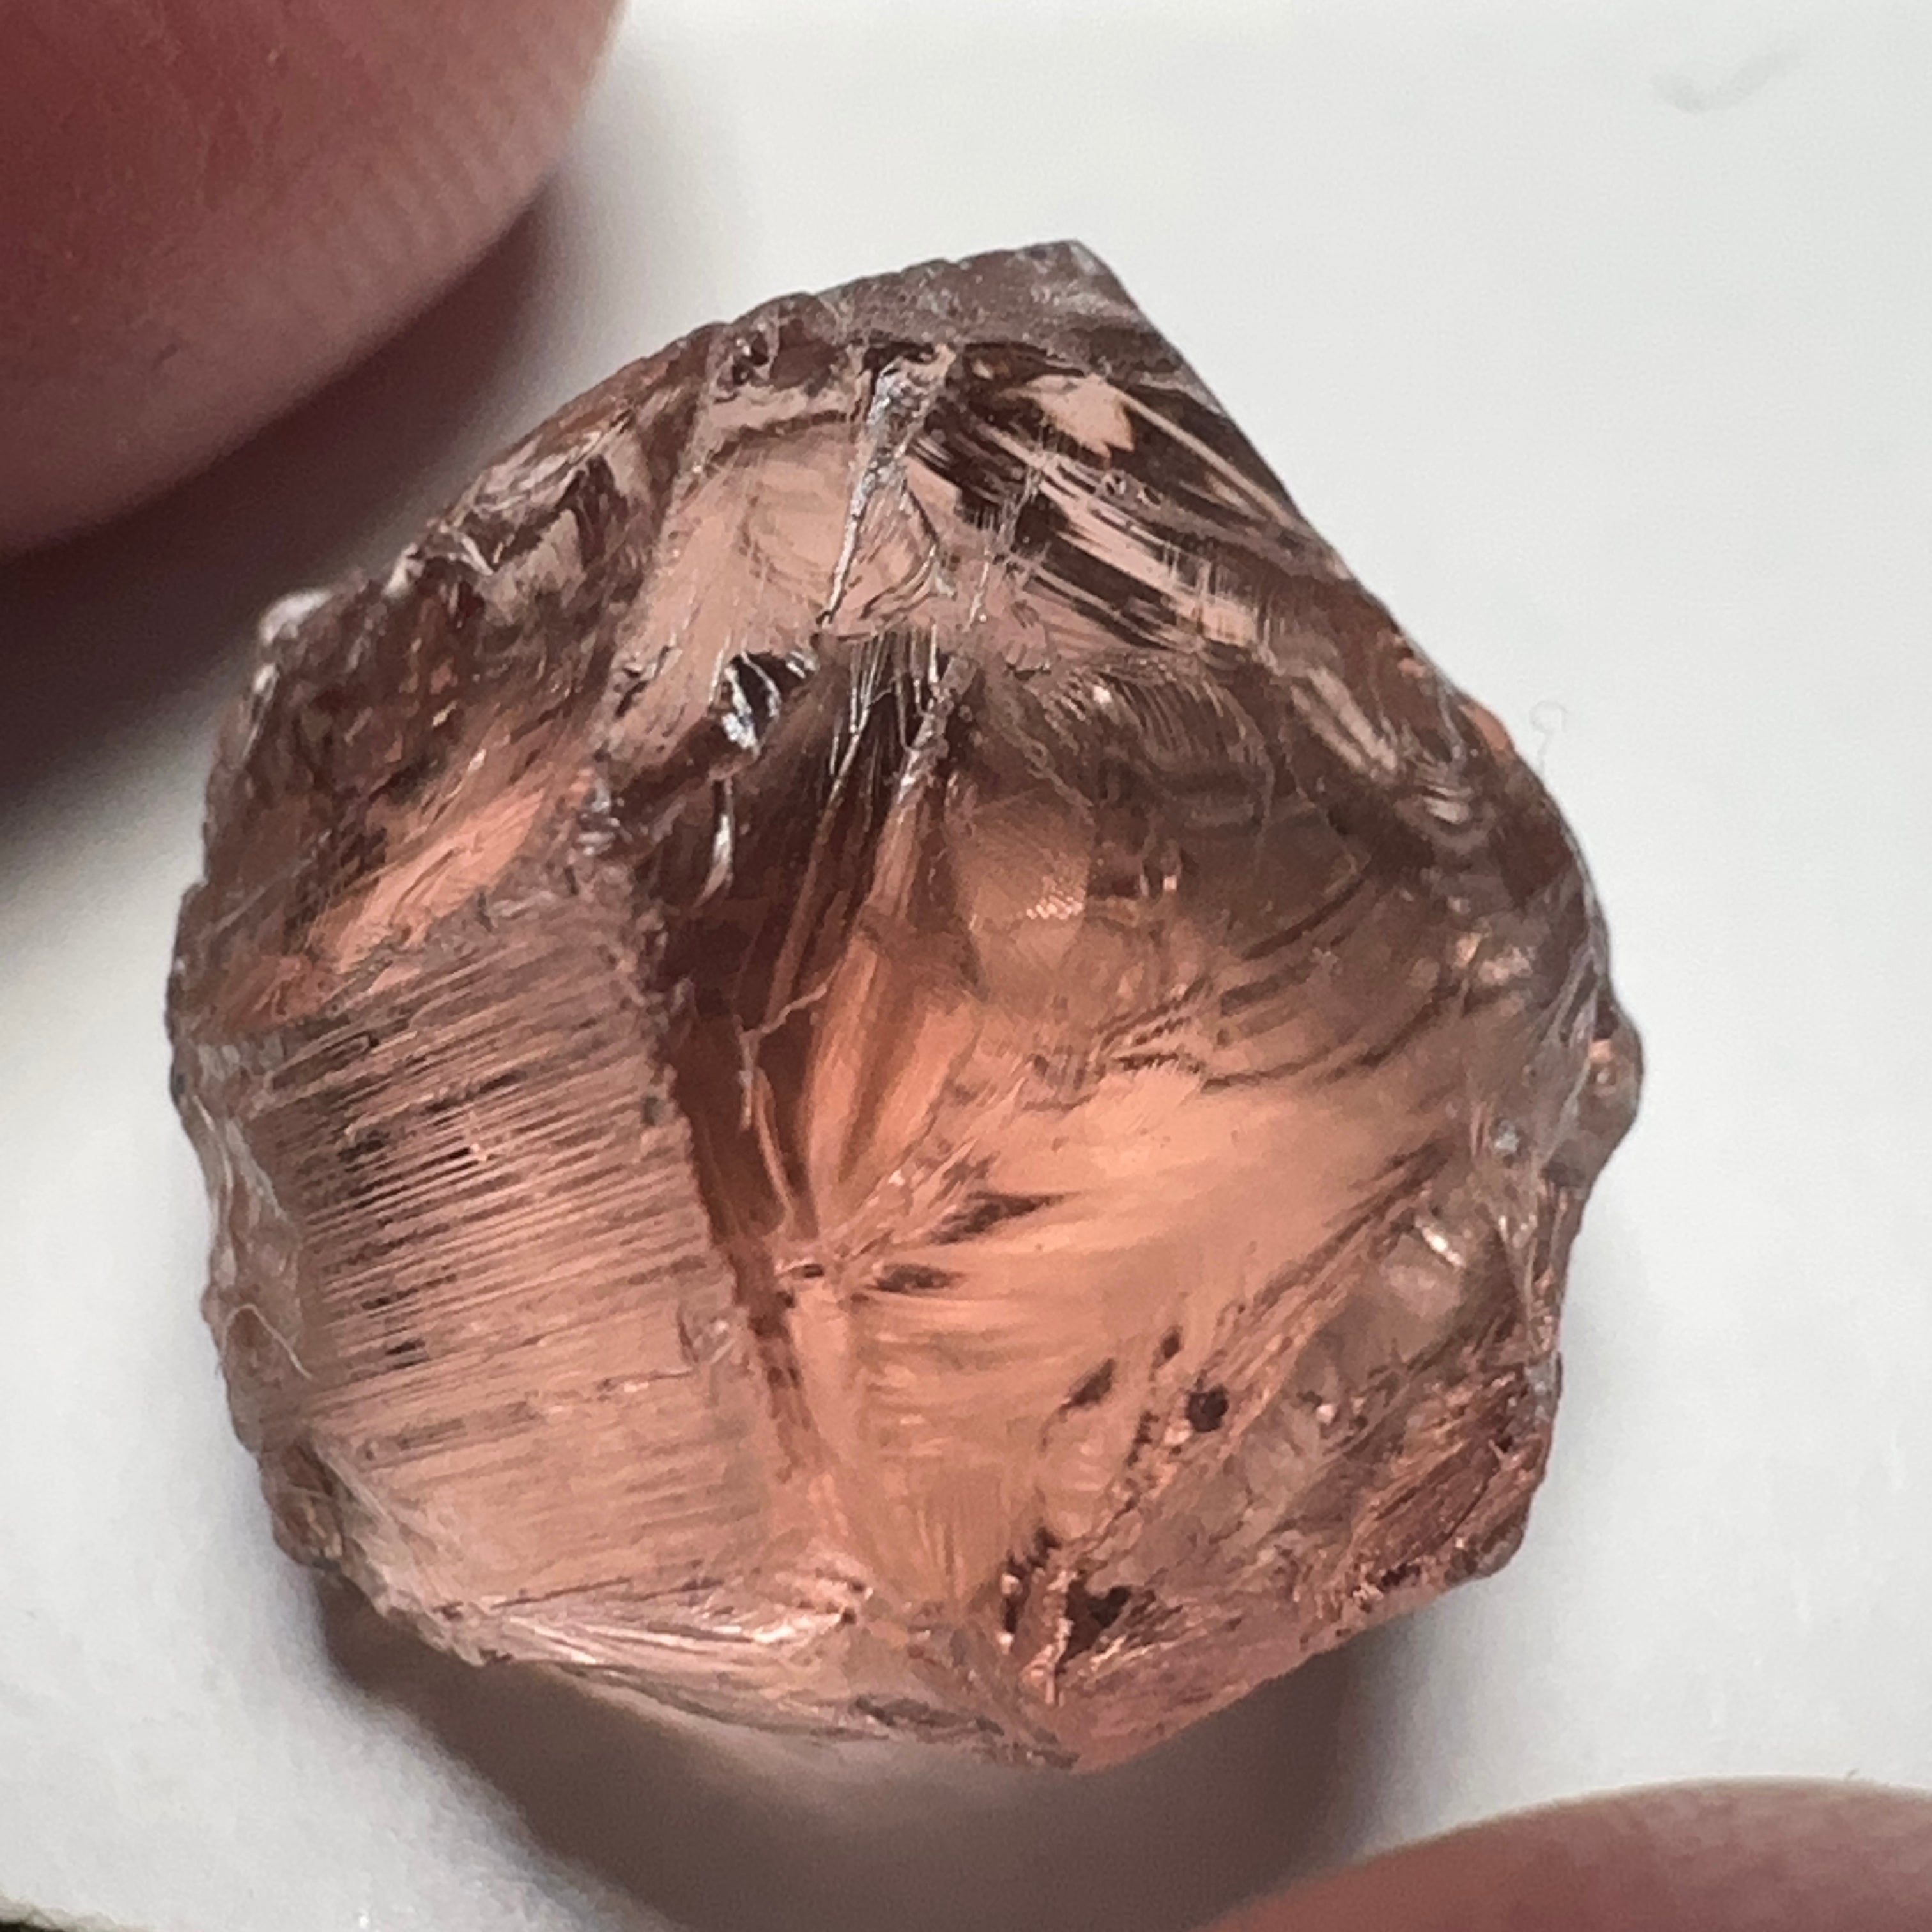 16.45ct Very Rare, Peach Pink Scapolite, Tanzania, Untreated Unheated, VVS-IF (flawless) see video